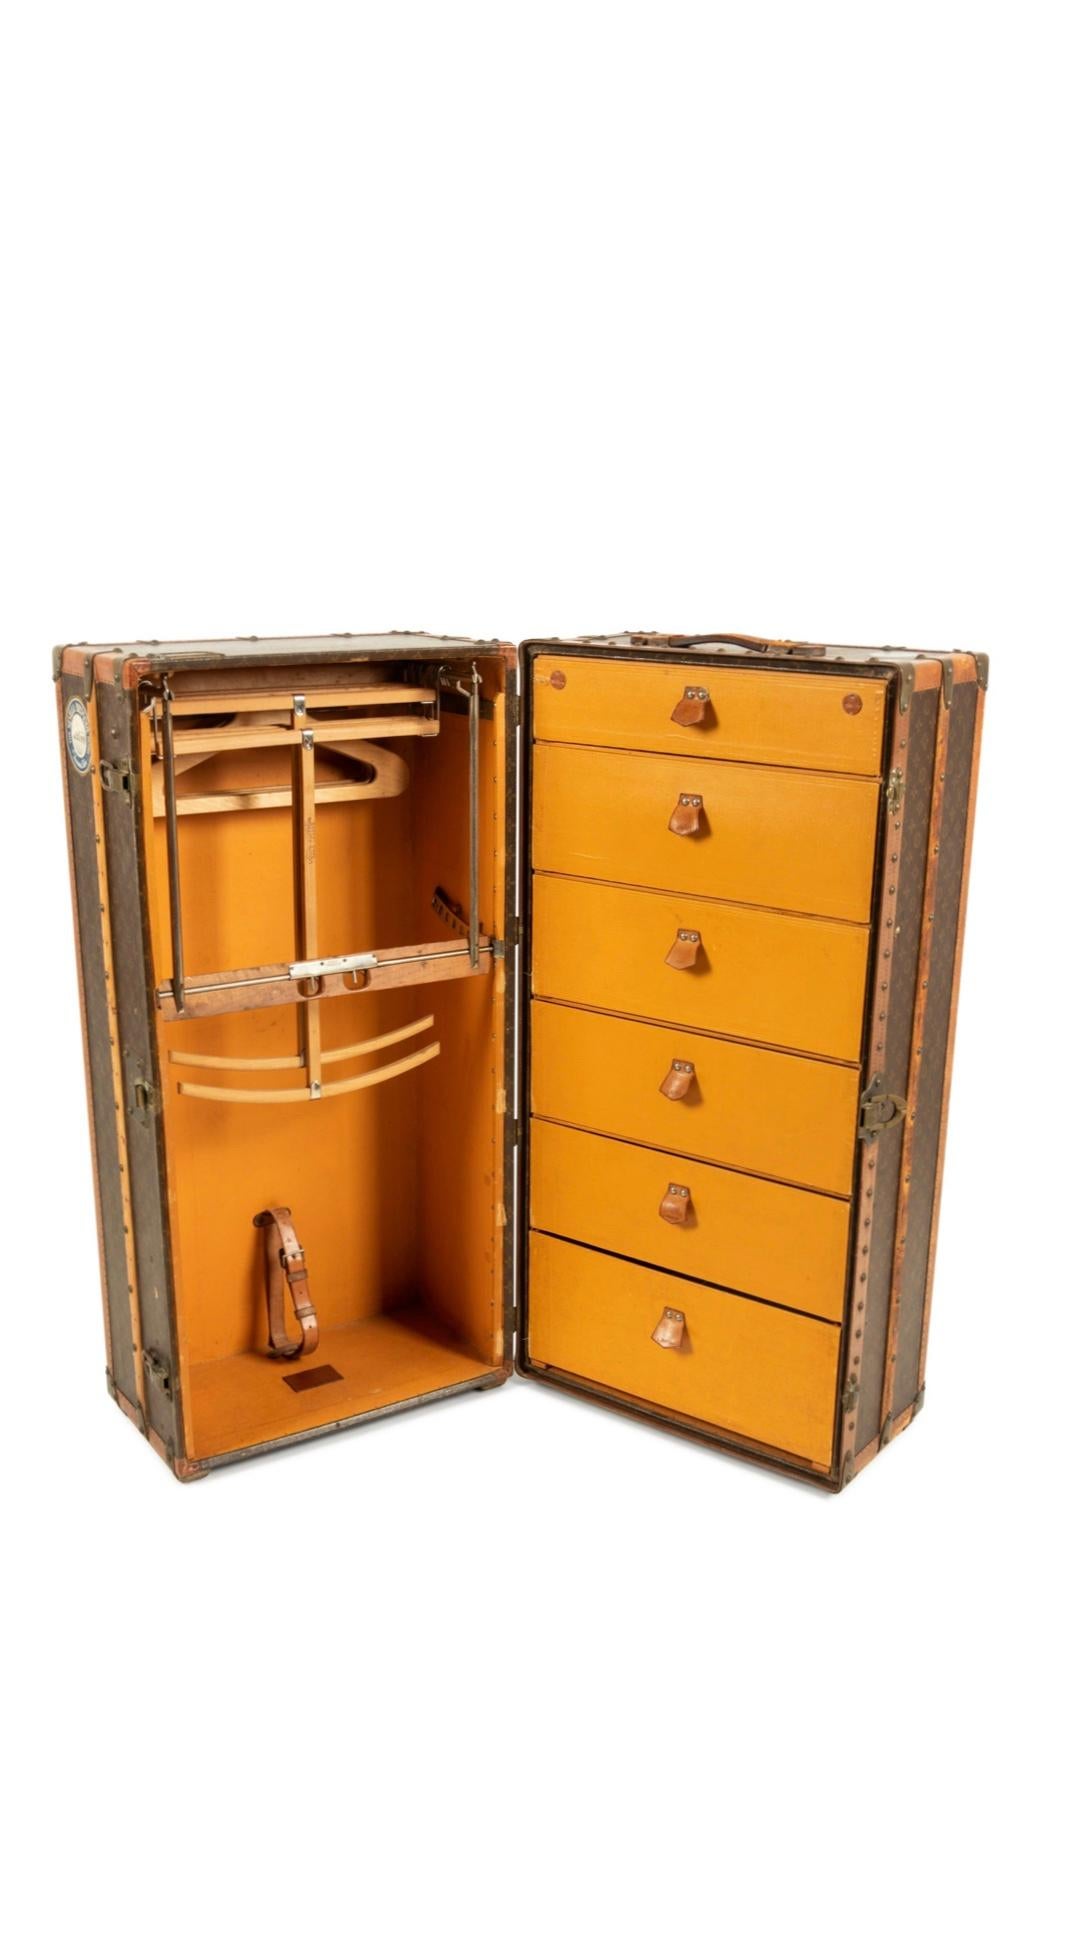 Louis Vuitton Wardrobe Steamer trunk, early 20th century

Wardrobe trunk covered in monogram canvas with natural Lozine leather trim and handles, and brass hardware with front lock and key. The interior has wood LV hangers and dust ruffle on